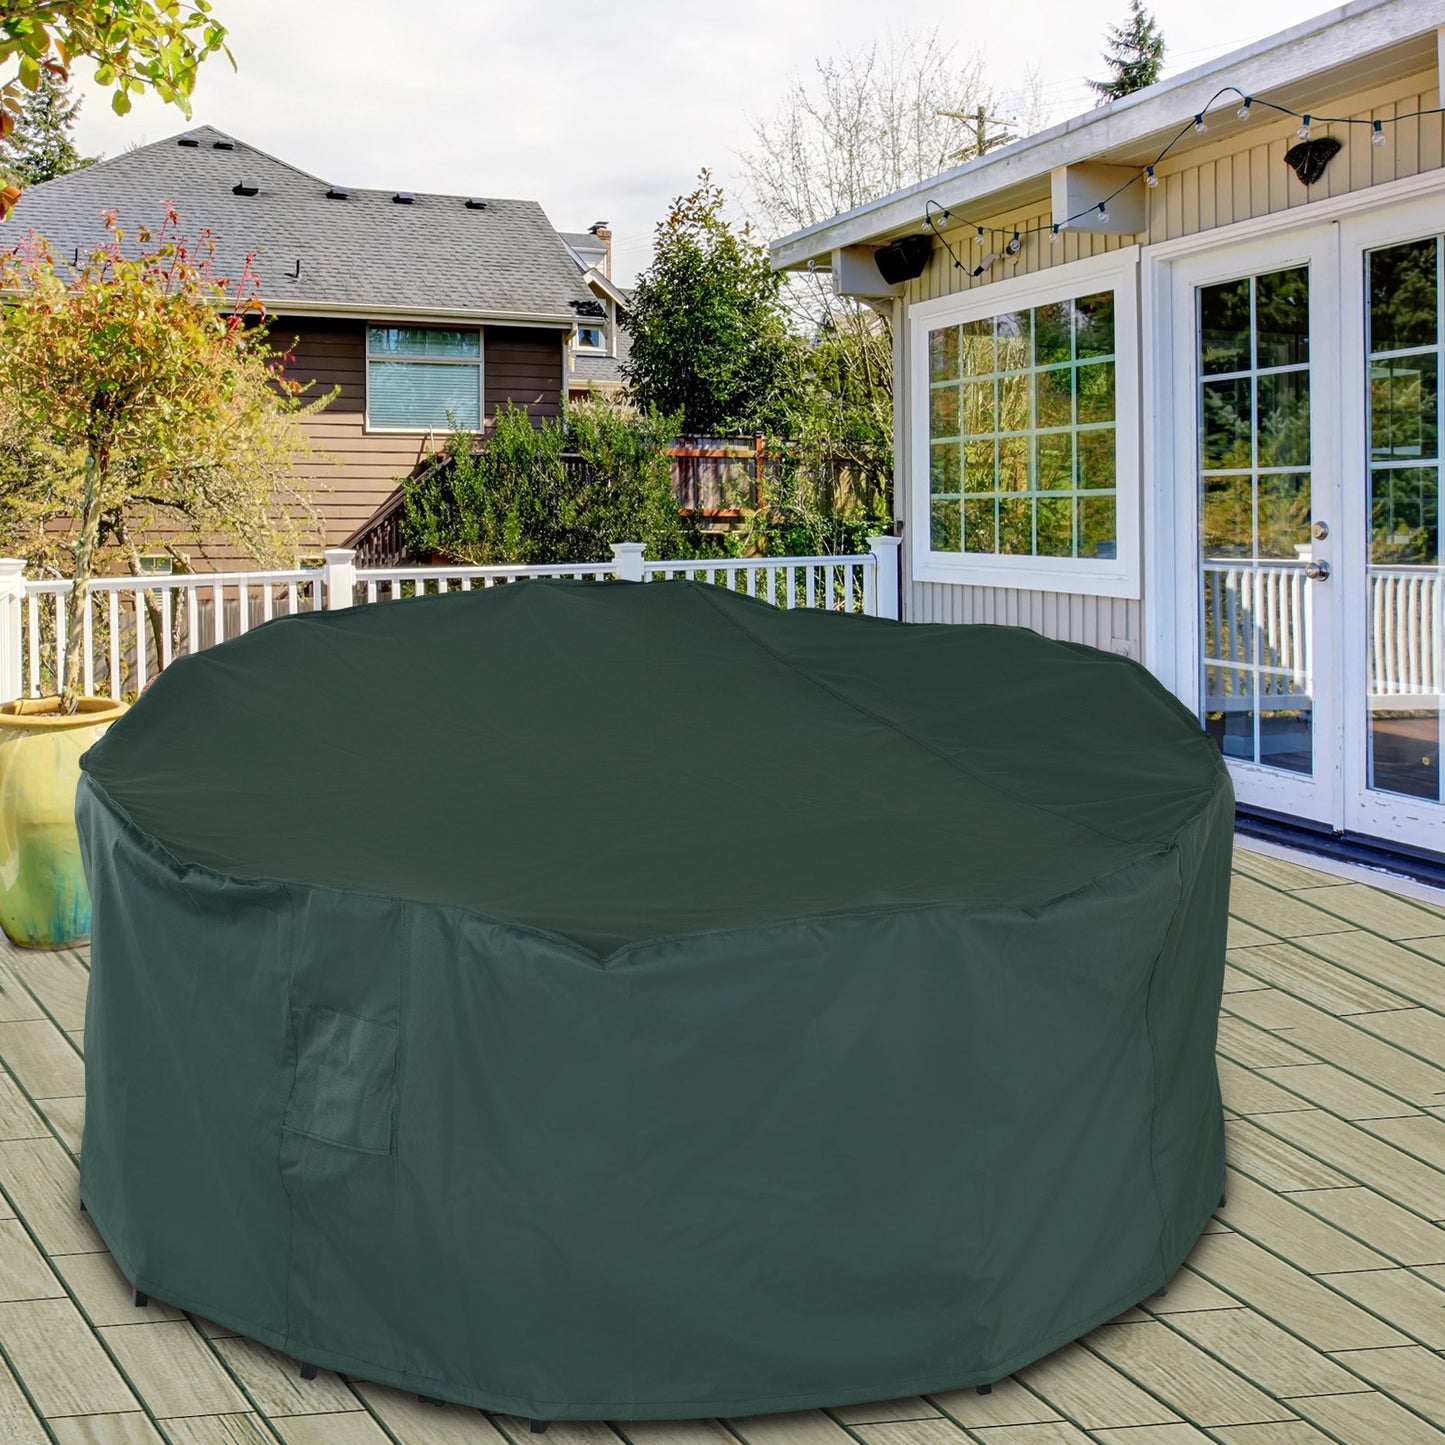 Outsunny PVC Coated Large Round 600D Waterproof Outdoor Furniture Cover Green